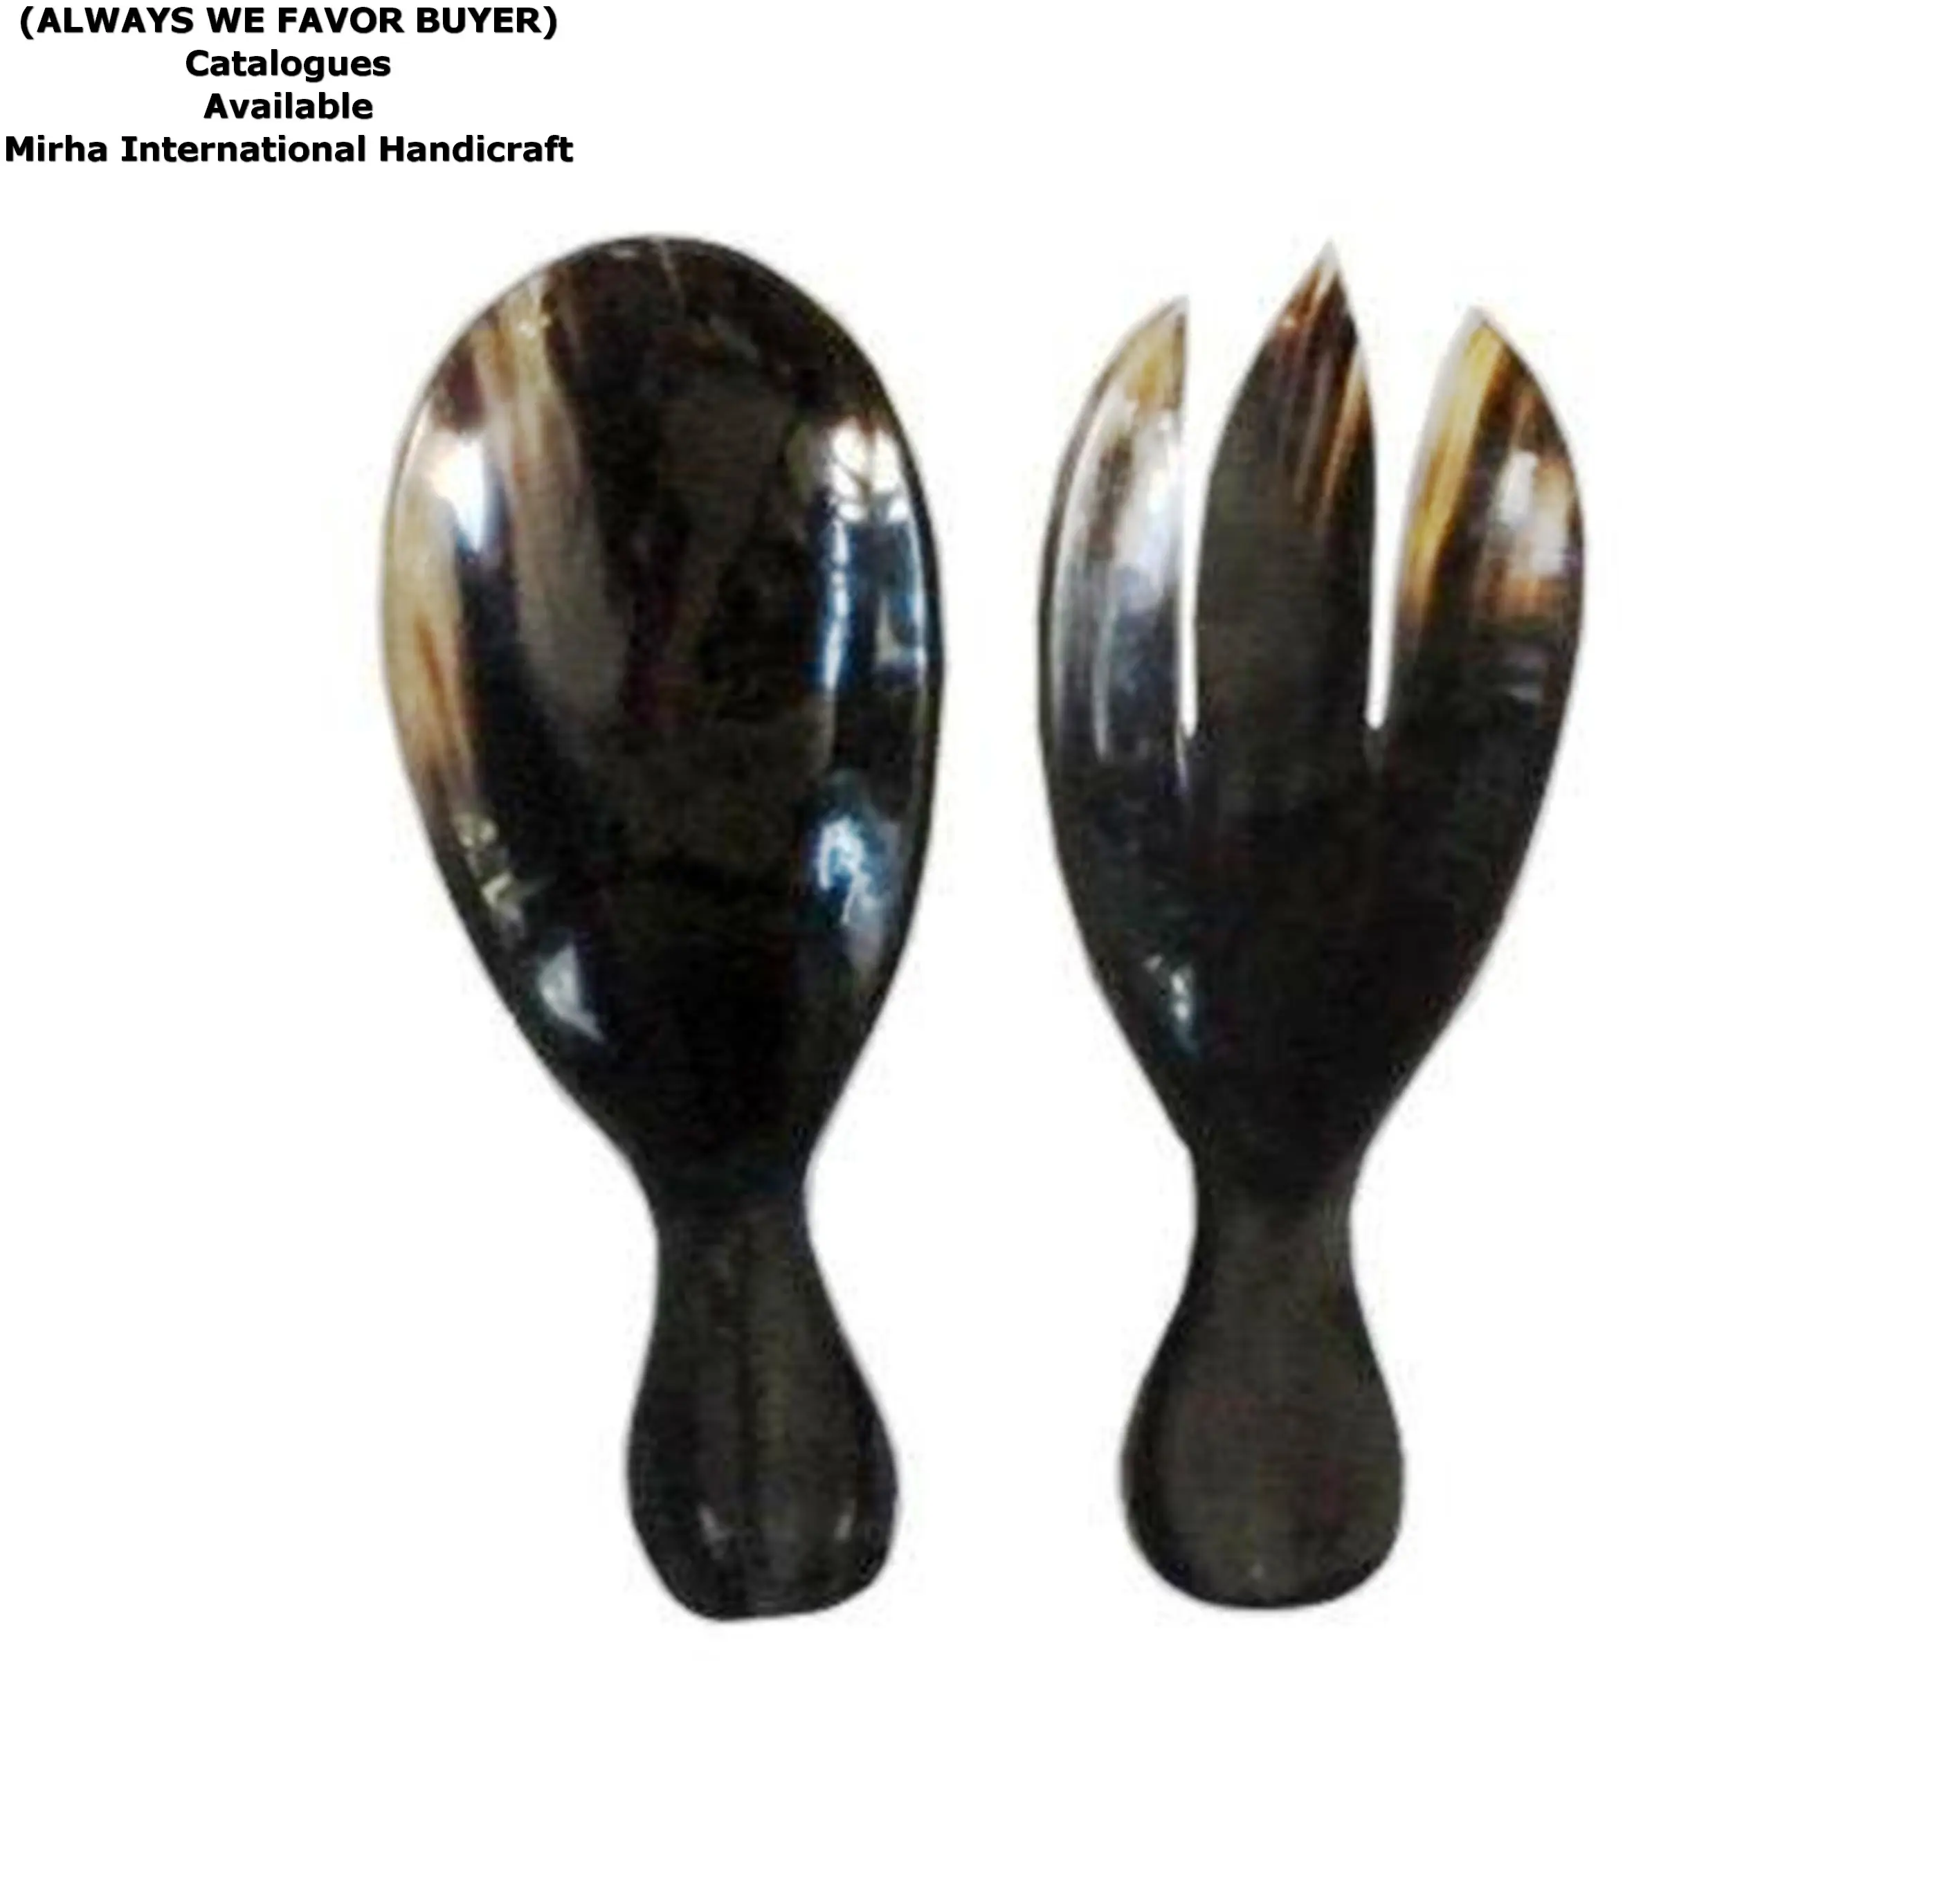 Horn Bowl Oval Mirha Gifts and Decoration Unique Luxury Buffalo Horn Salad Server Made In India